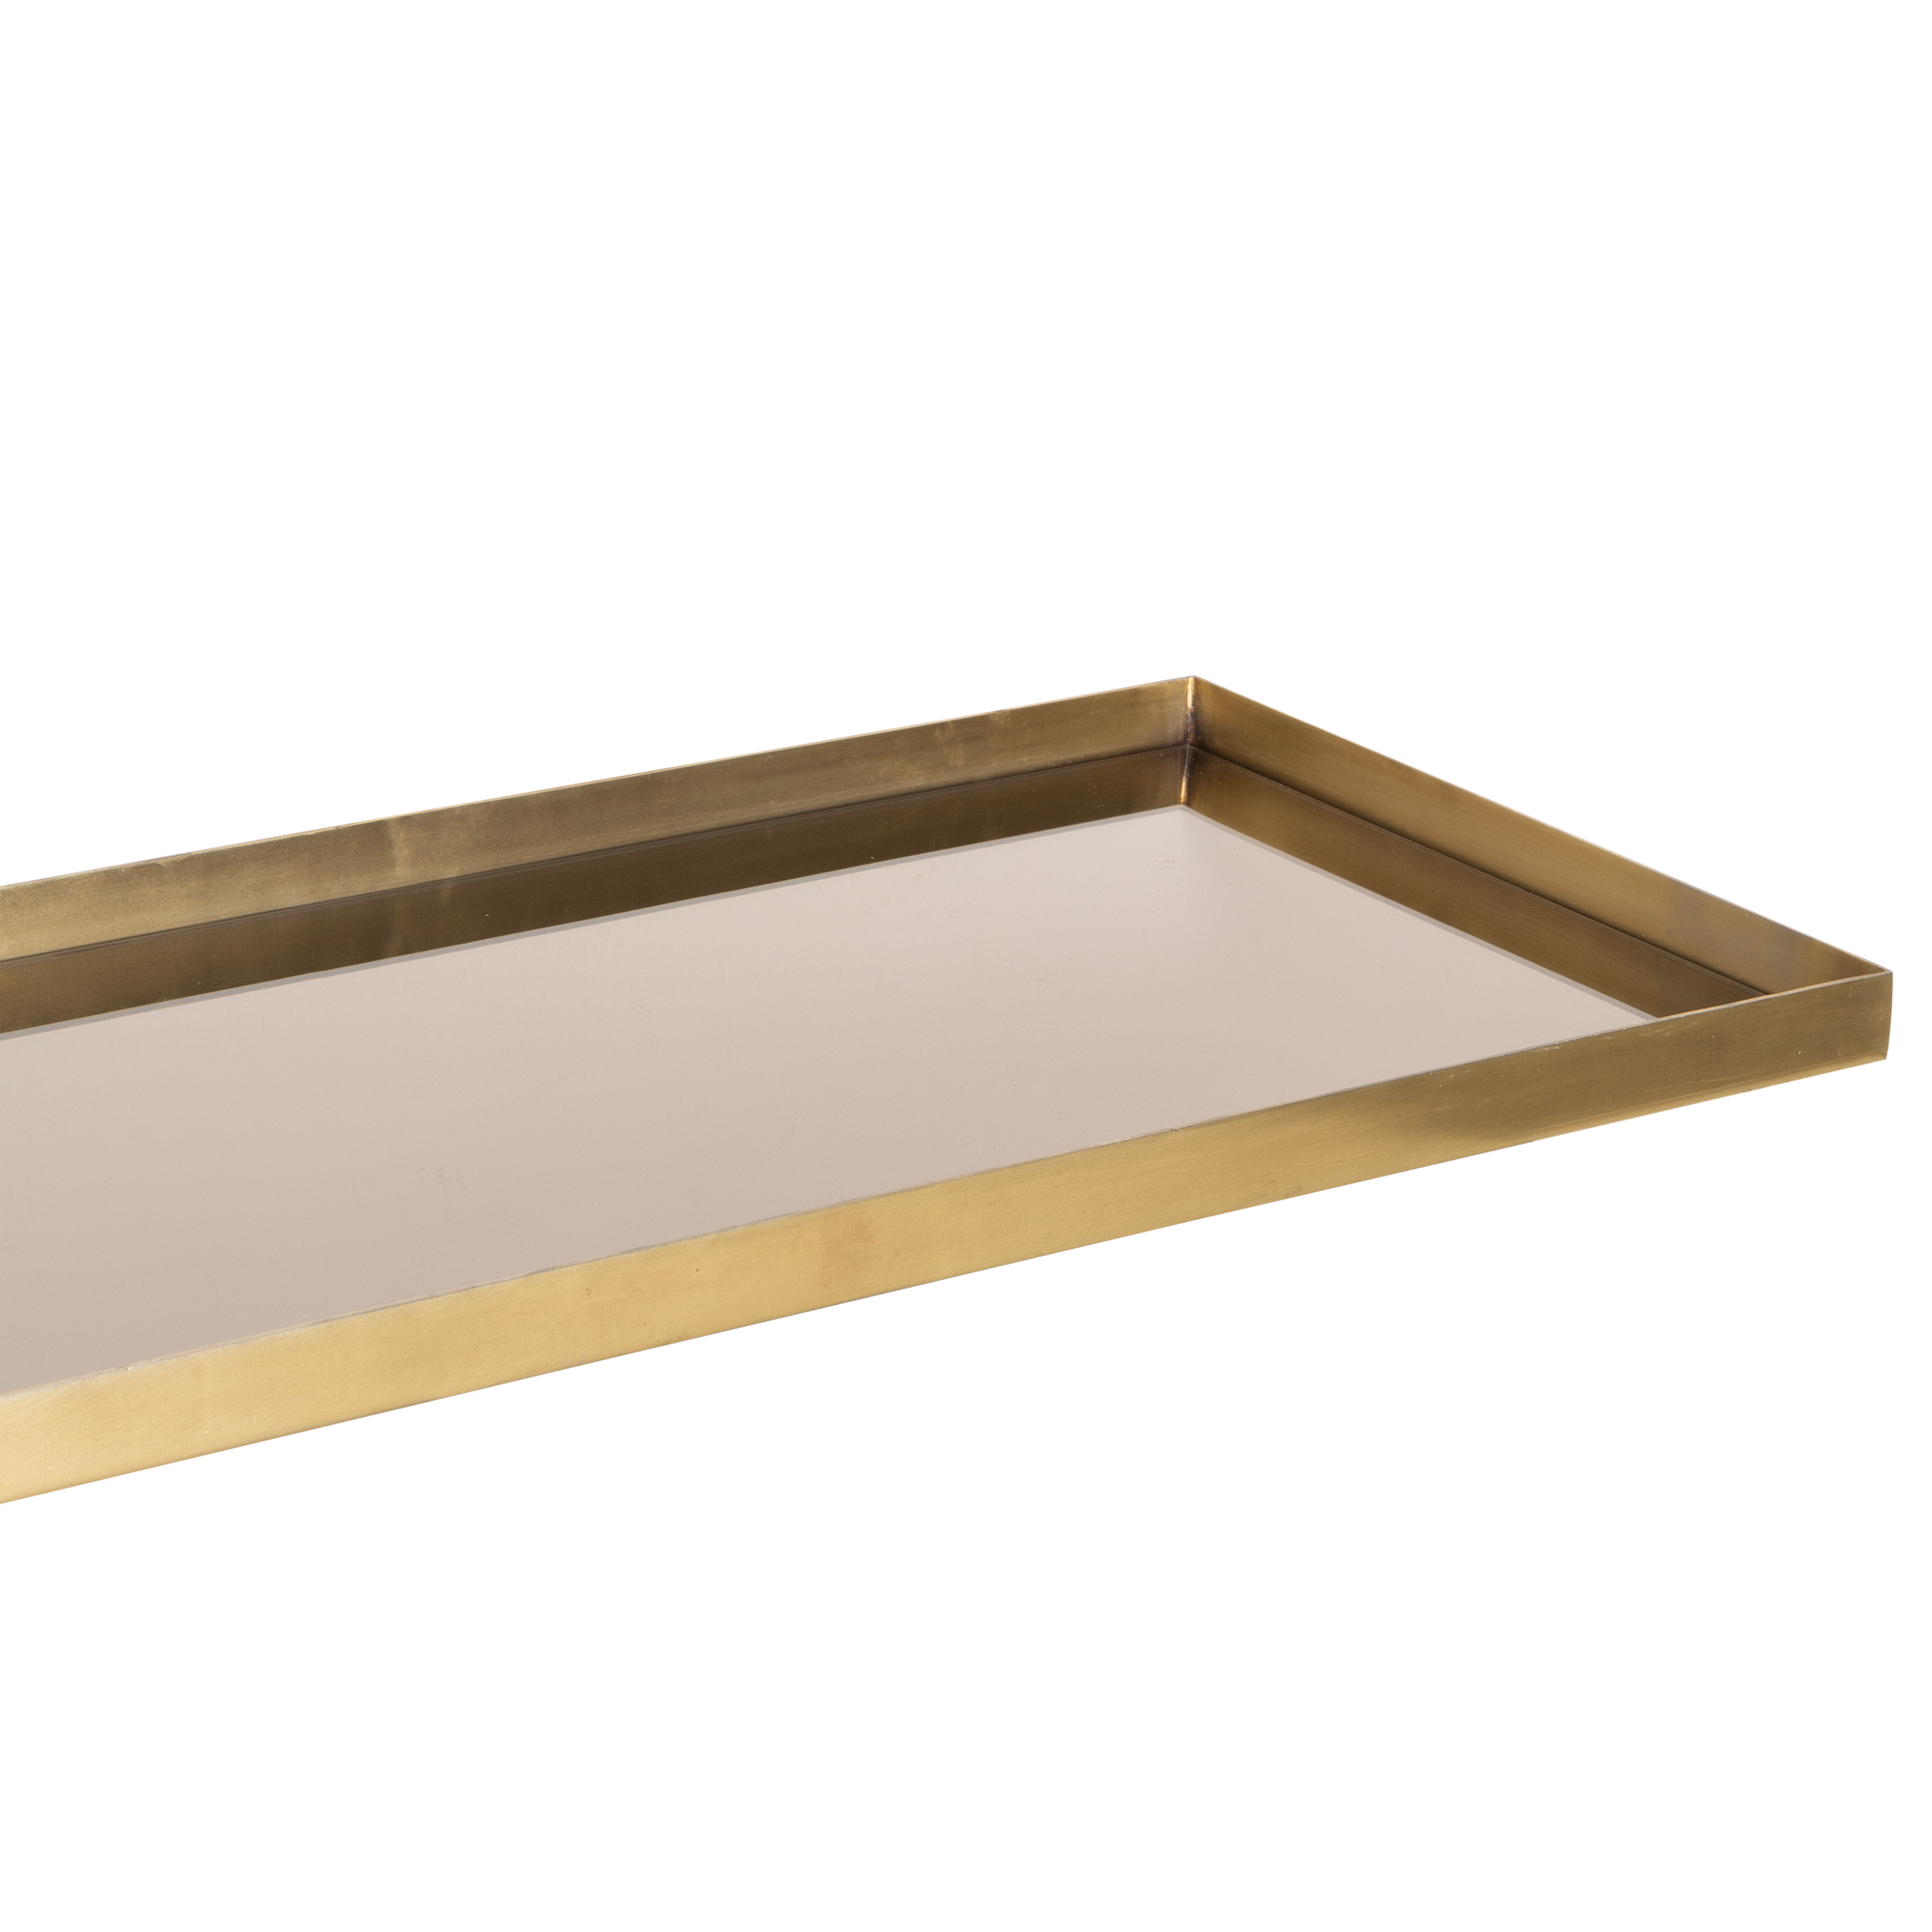 Characterized by its confident presence and its luxurious build quality, the Reflect Long Rectangular Tray is defined by its clean, sharp lines and its elevation of simple forms.